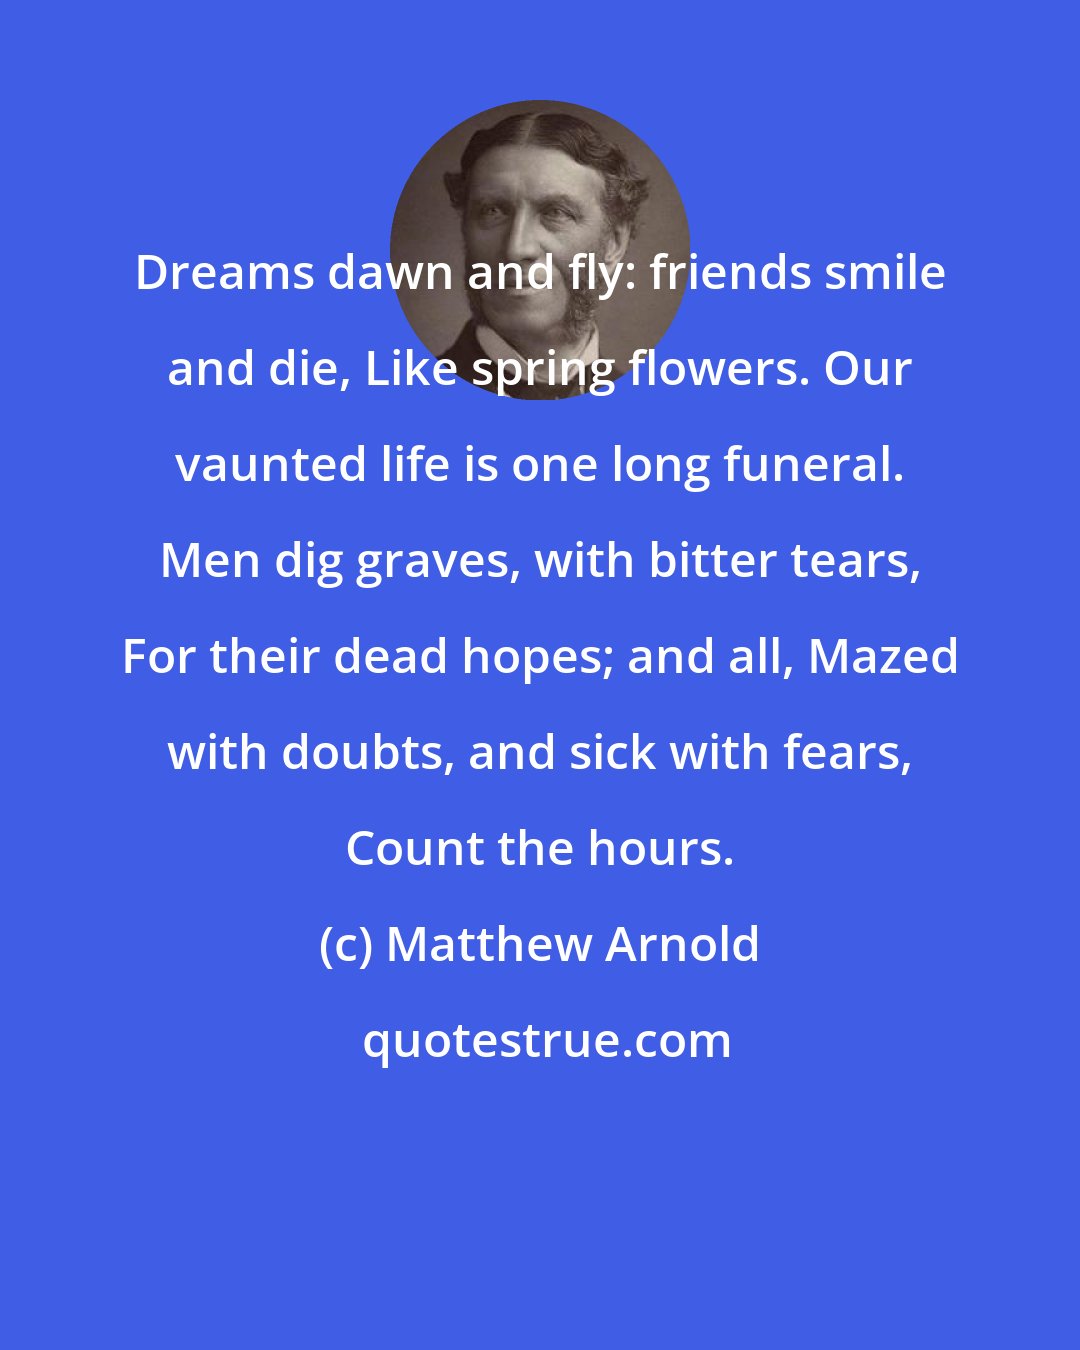 Matthew Arnold: Dreams dawn and fly: friends smile and die, Like spring flowers. Our vaunted life is one long funeral. Men dig graves, with bitter tears, For their dead hopes; and all, Mazed with doubts, and sick with fears, Count the hours.